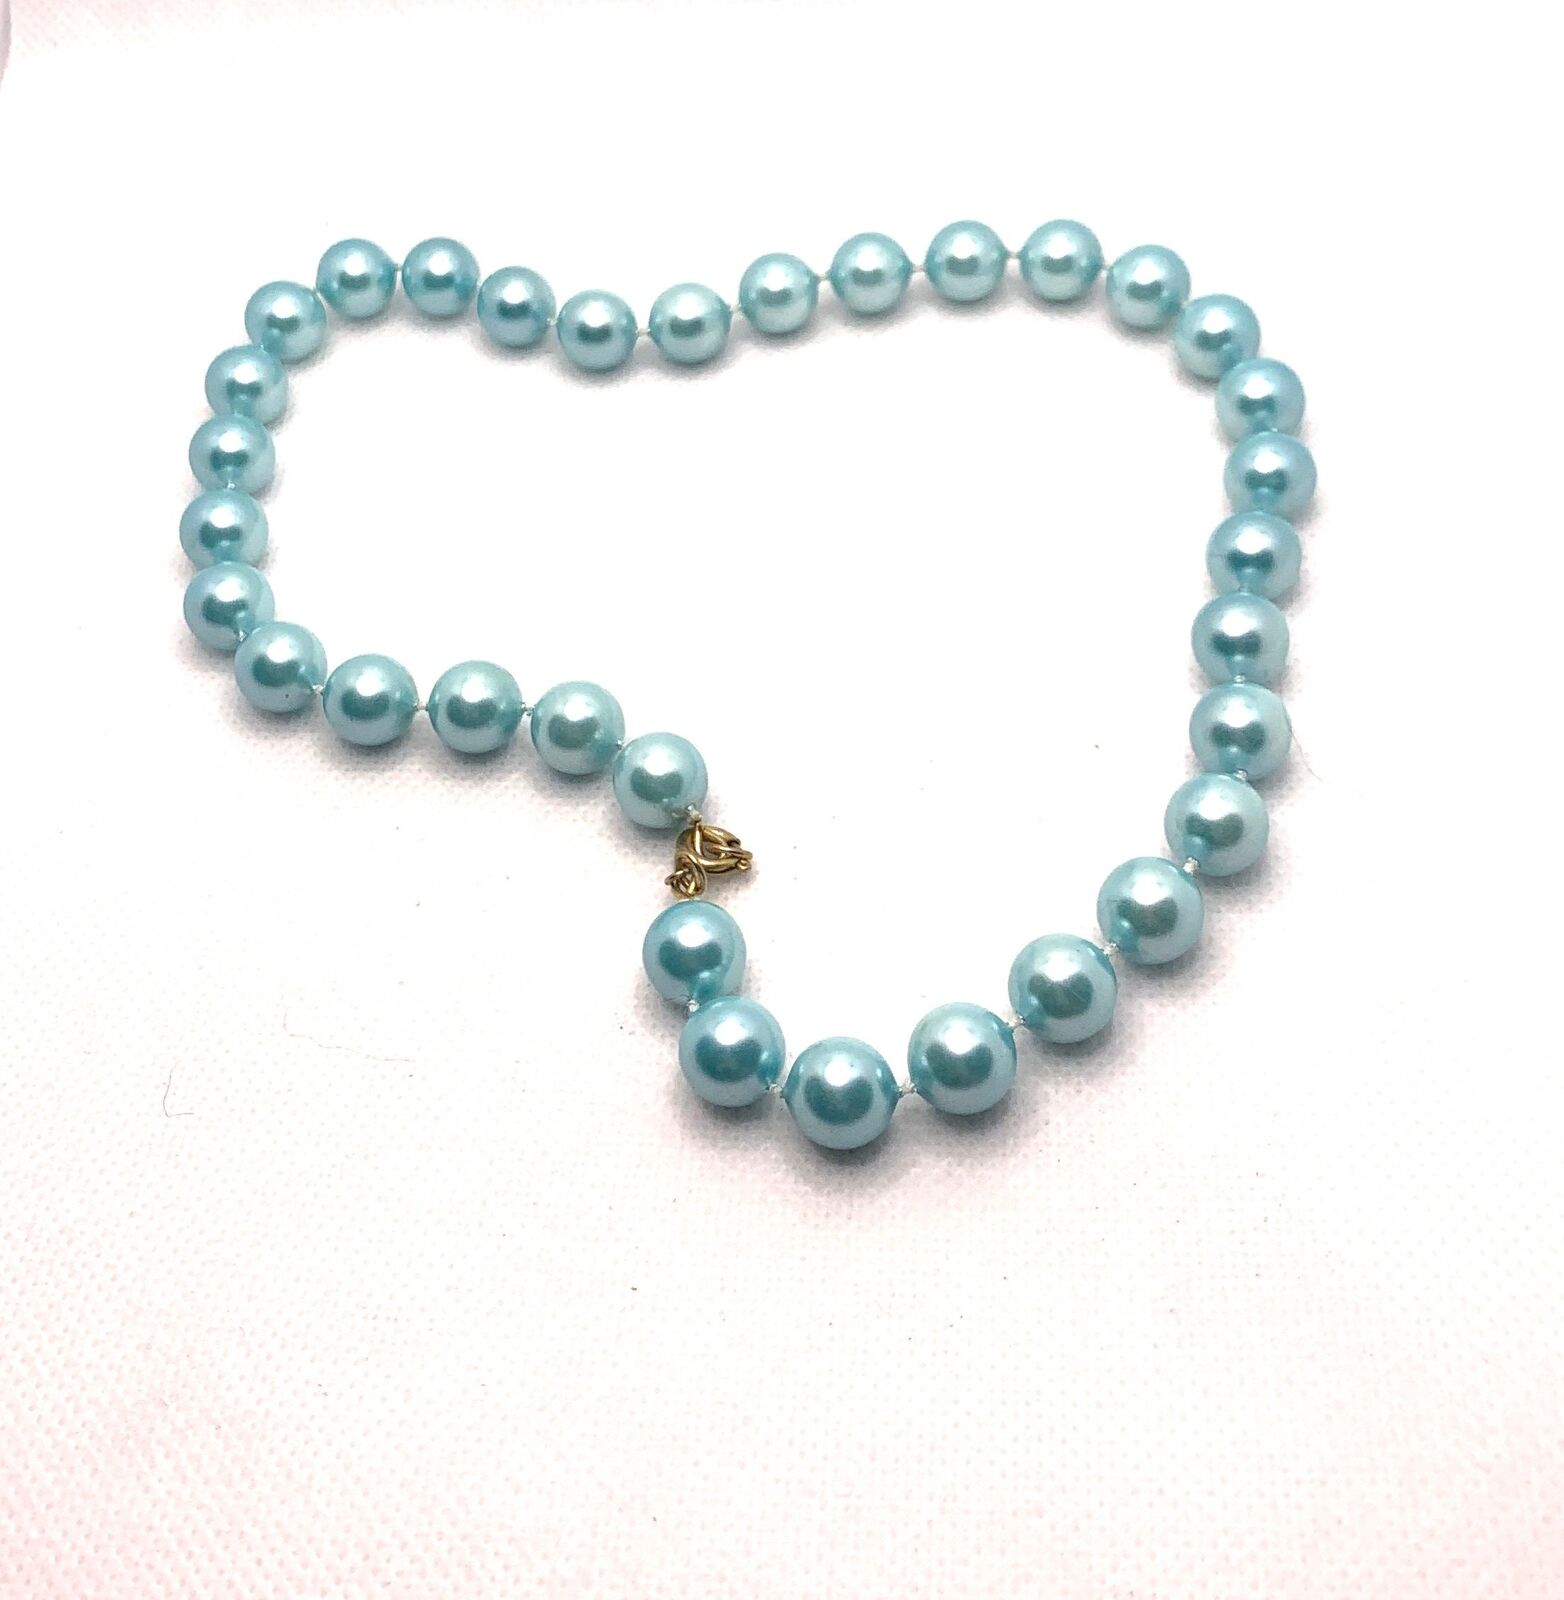 Light blue faux pearl knotted beaded necklace 16 inch